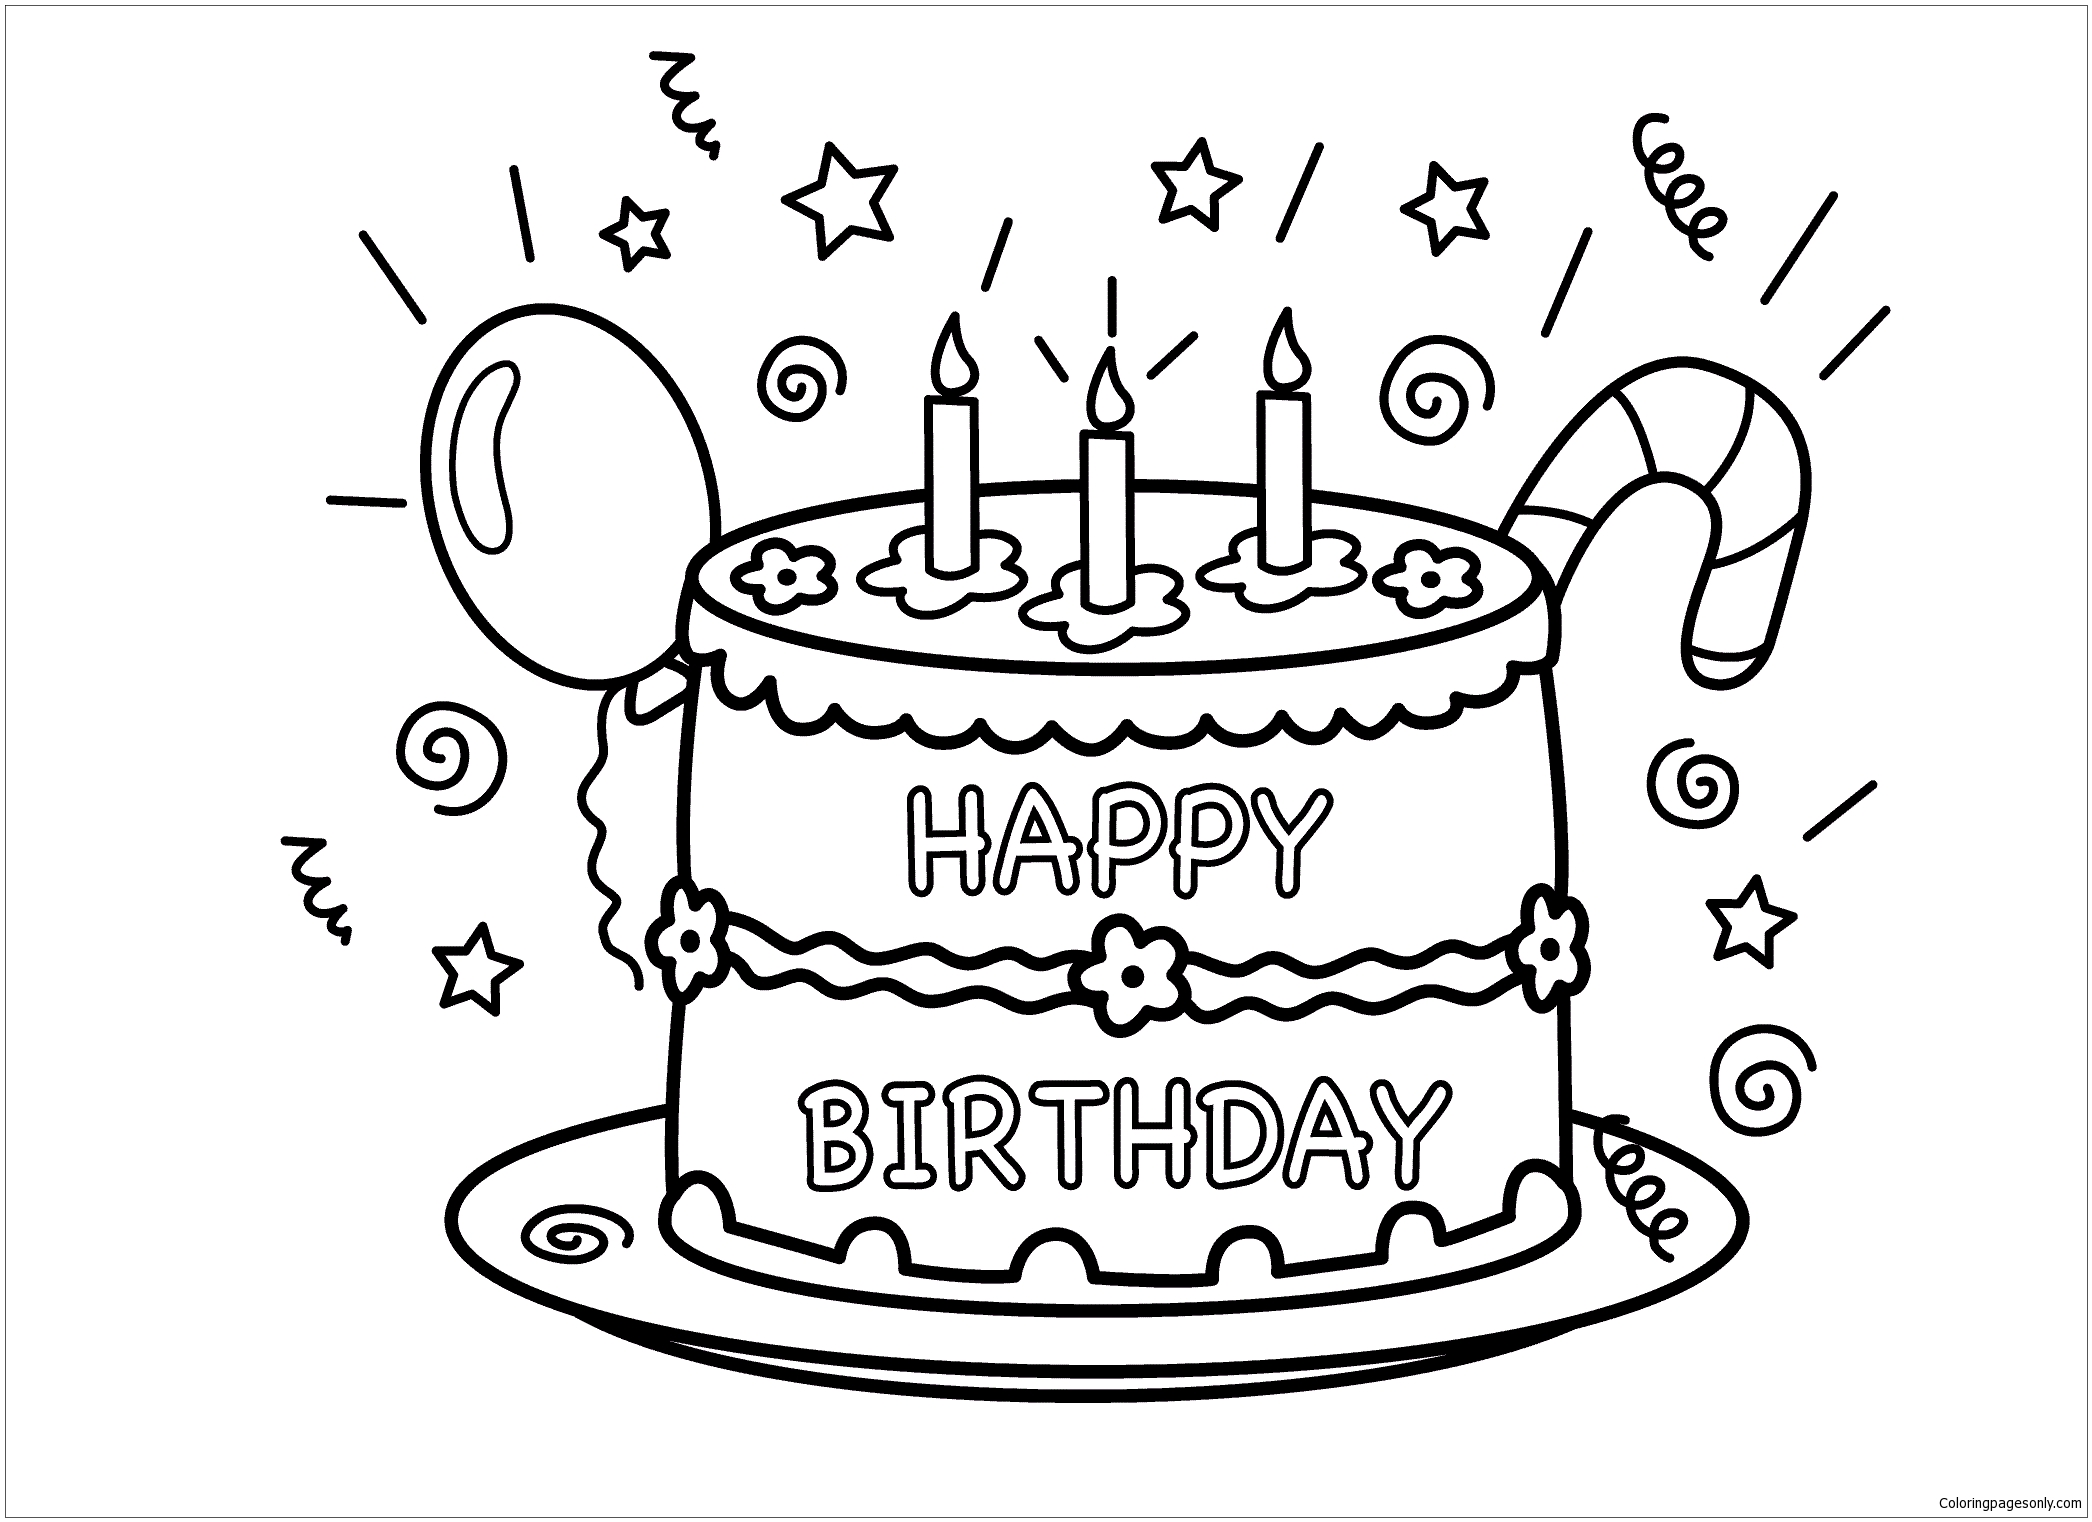 Spiderman Cake Coloring Page : Spiderman Coloring Pages Superheroes